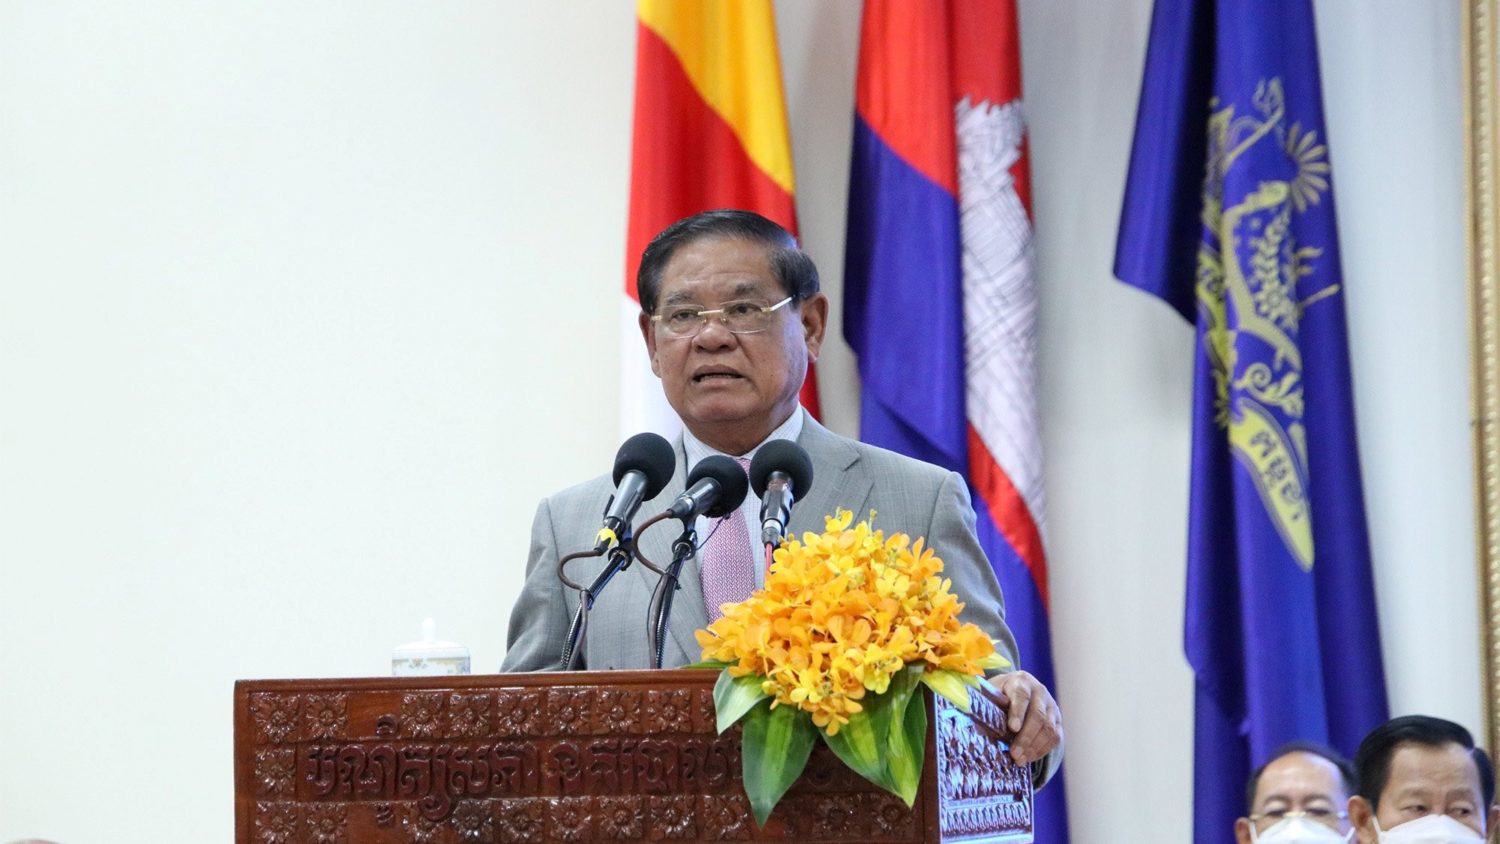 Interior Minister Sar Kheng delivers a speech at the police academy in Kandal province, in a photo posted to his Facebook page on July 26, 2022.